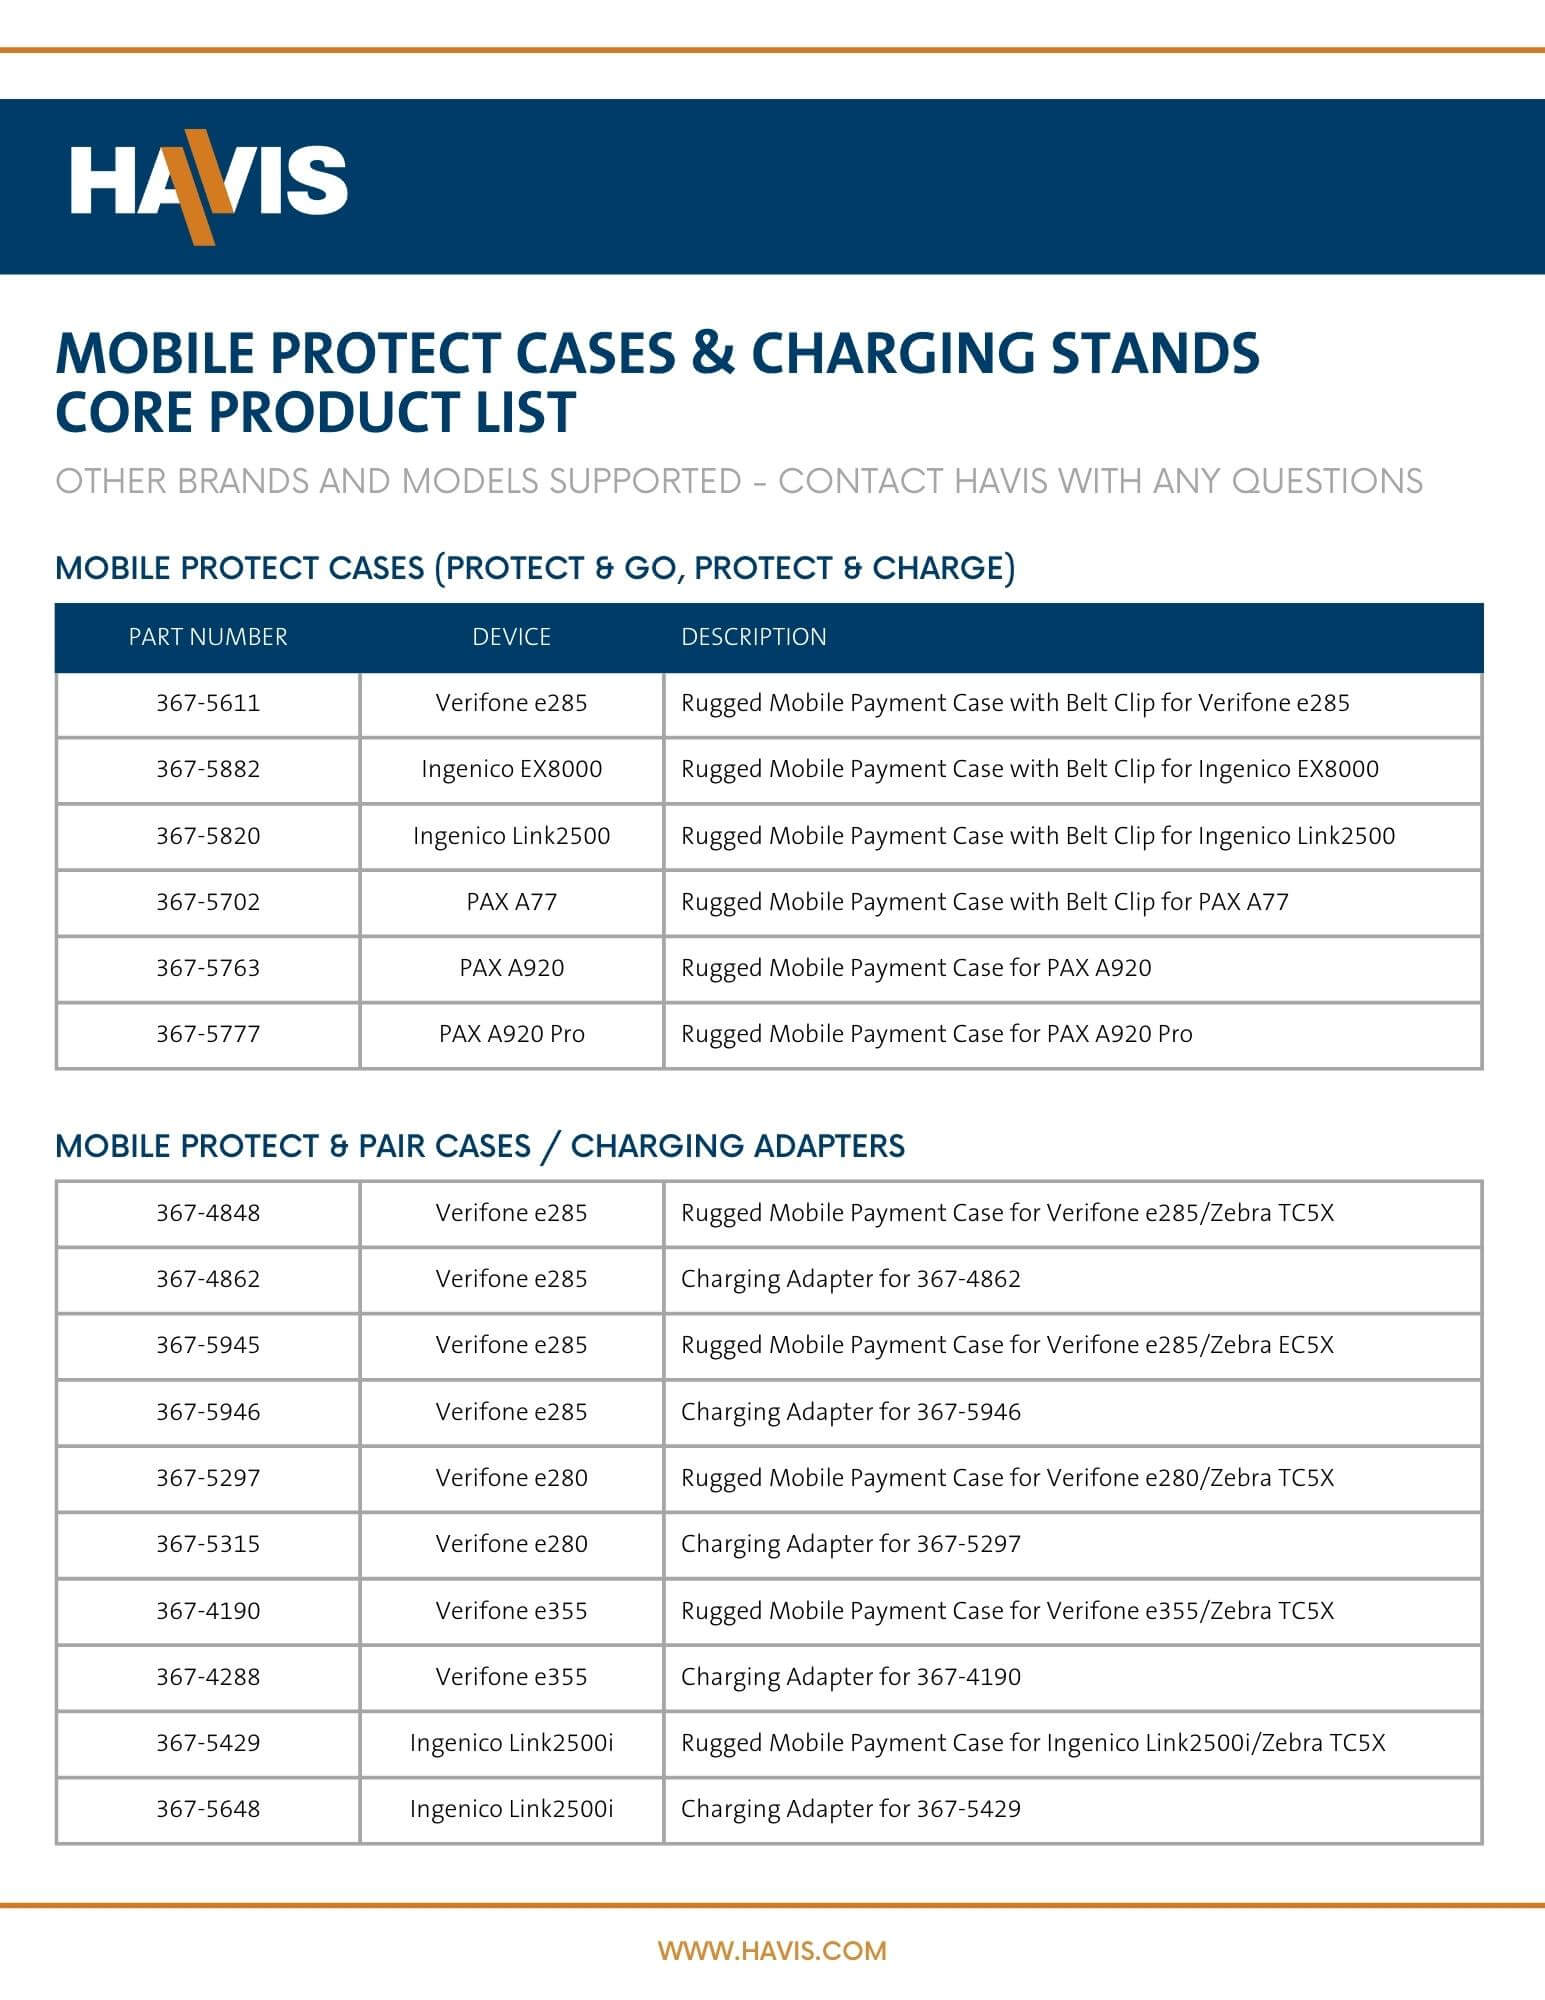 Mobile Protect Cases & Charging Stands – Core Product List